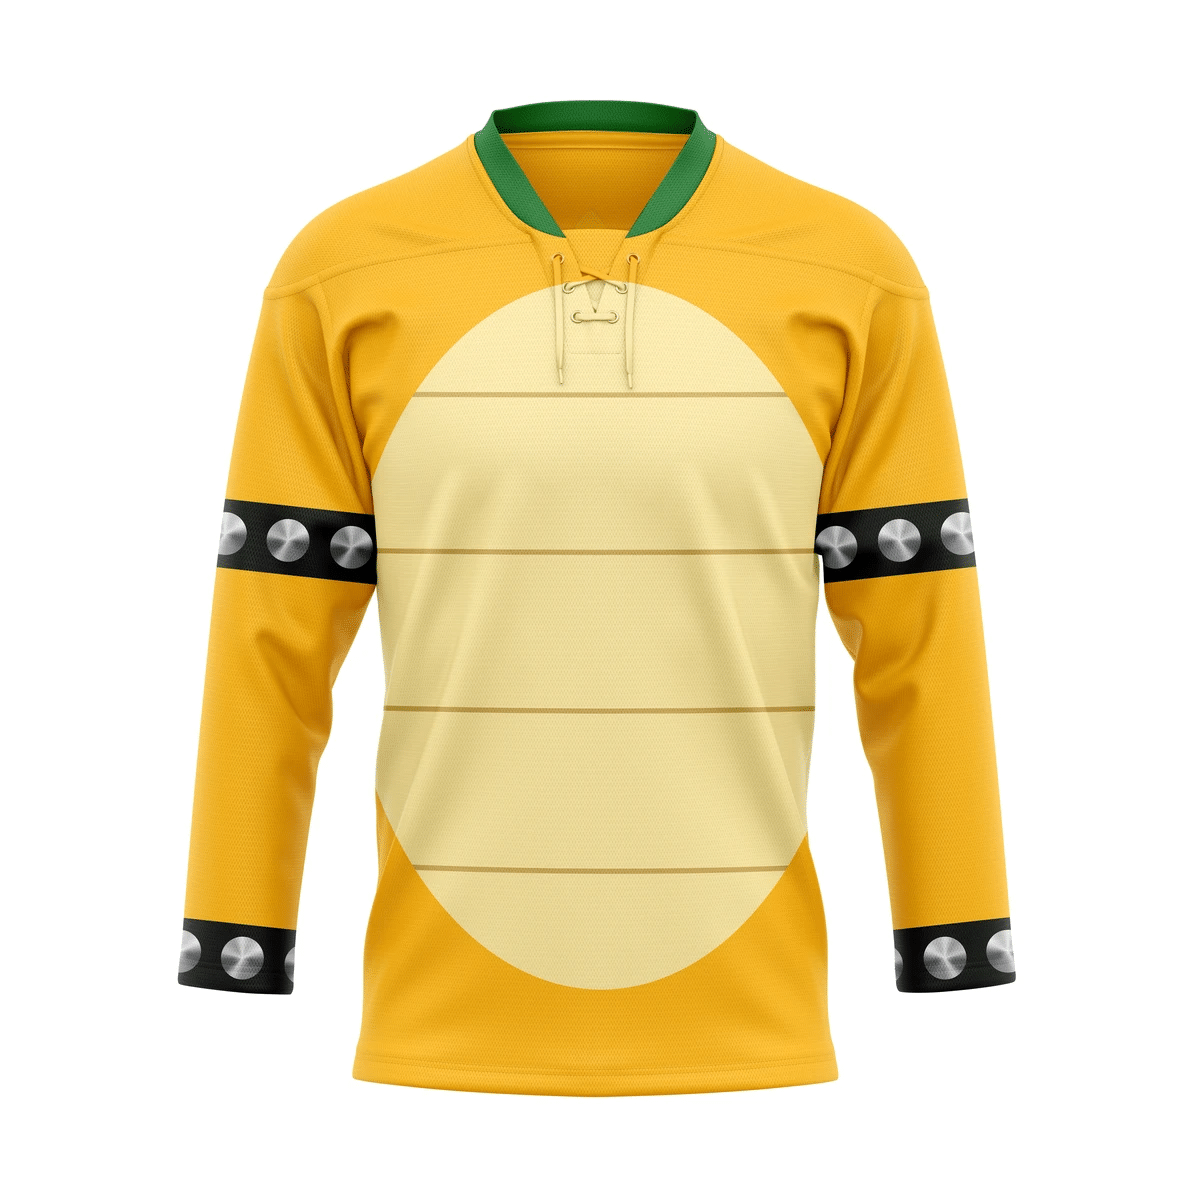 Choosing a hockey jersey is not as difficult as you think. 13